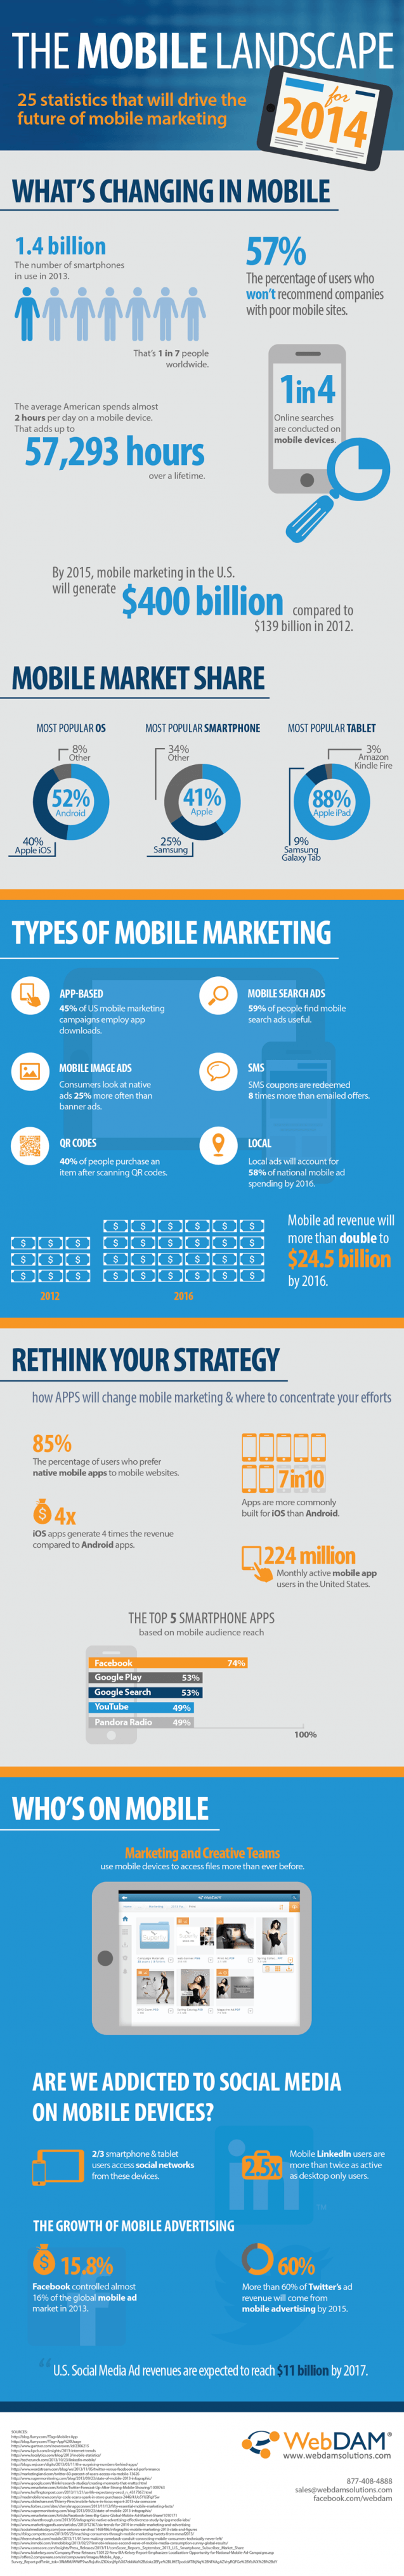 0207 WebDAMSolutions 637x4061 The 2014 Mobile Landscape: 25 Statistics That Will Drive The Future of Mobile Marketing [Infographic]